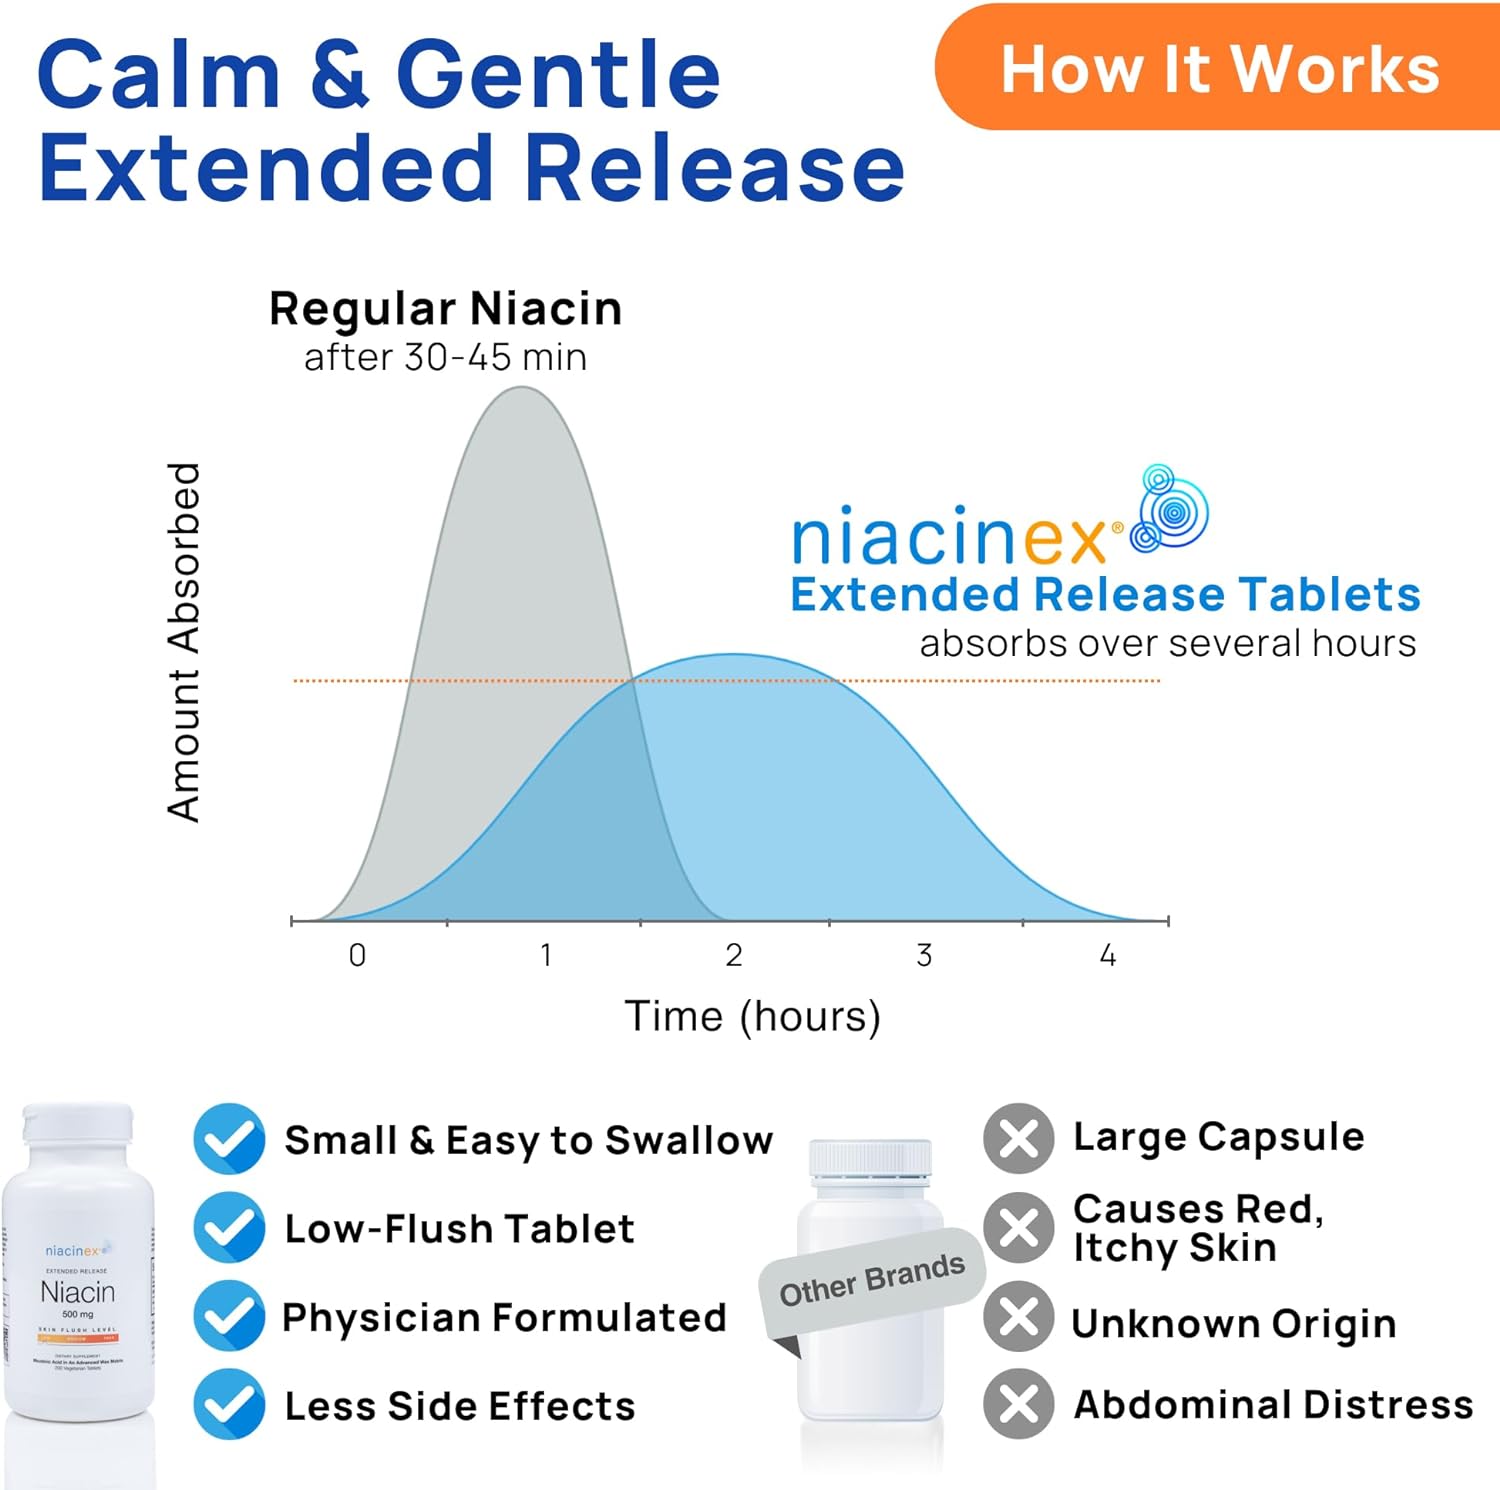 Niacin 500mg Extended Time Release Tablets Minimal to No-Flush, Vitamin B3 Supplement - Cholesterol Balance, Nicotinic Acid - Vegan, cGMP, Made in The USA - 200 Count (1)